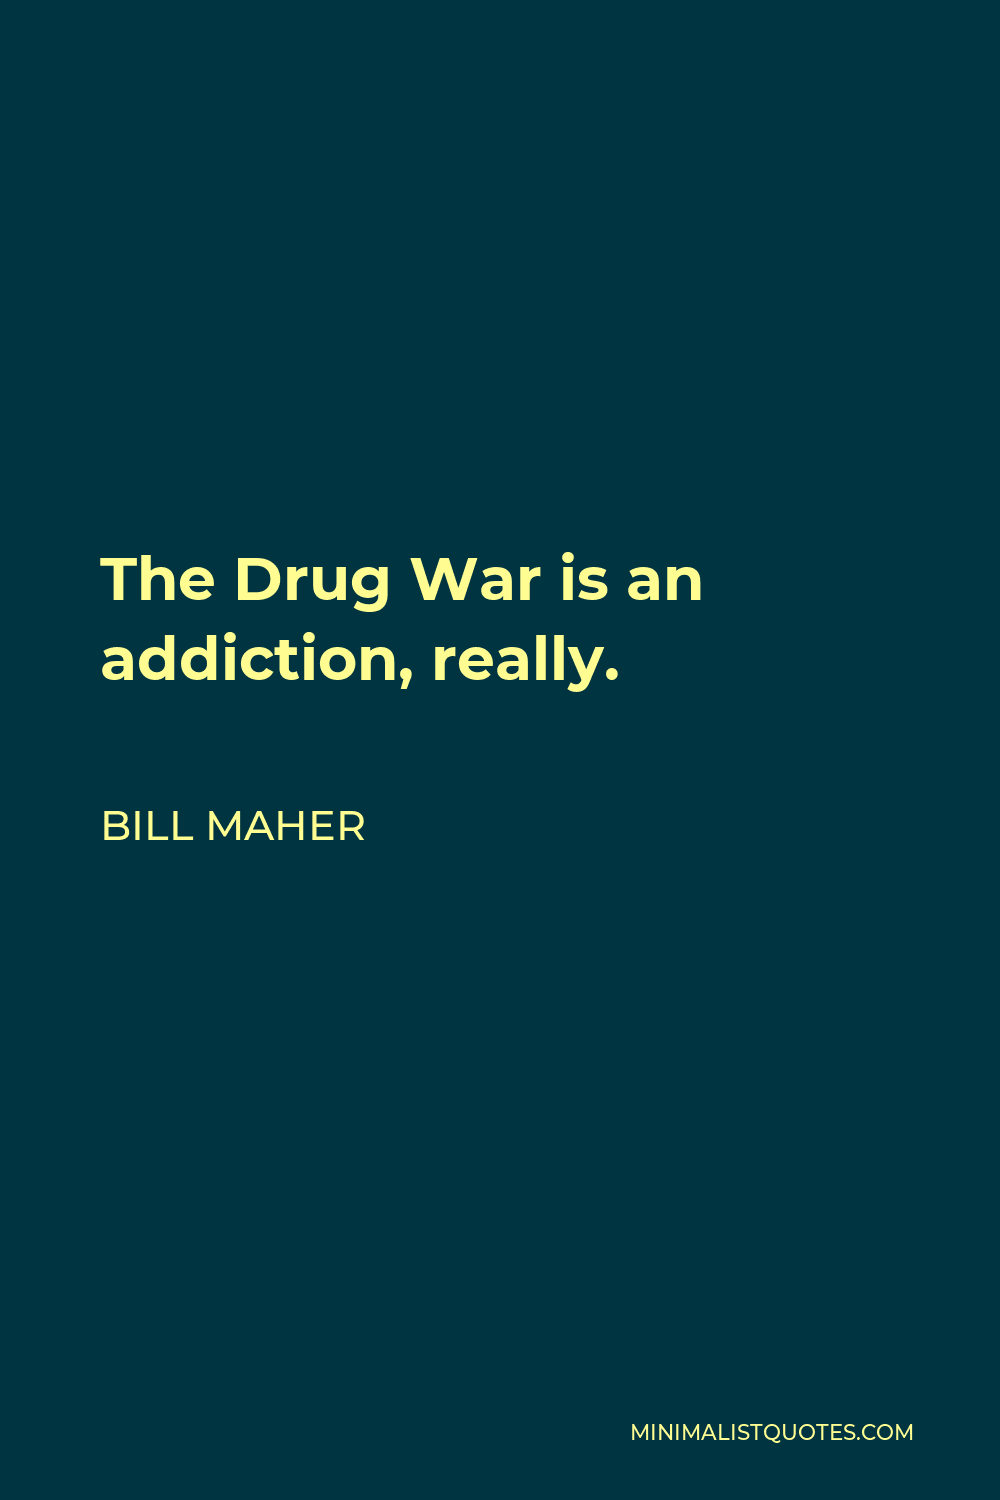 Bill Maher Quote - The Drug War is an addiction, really.